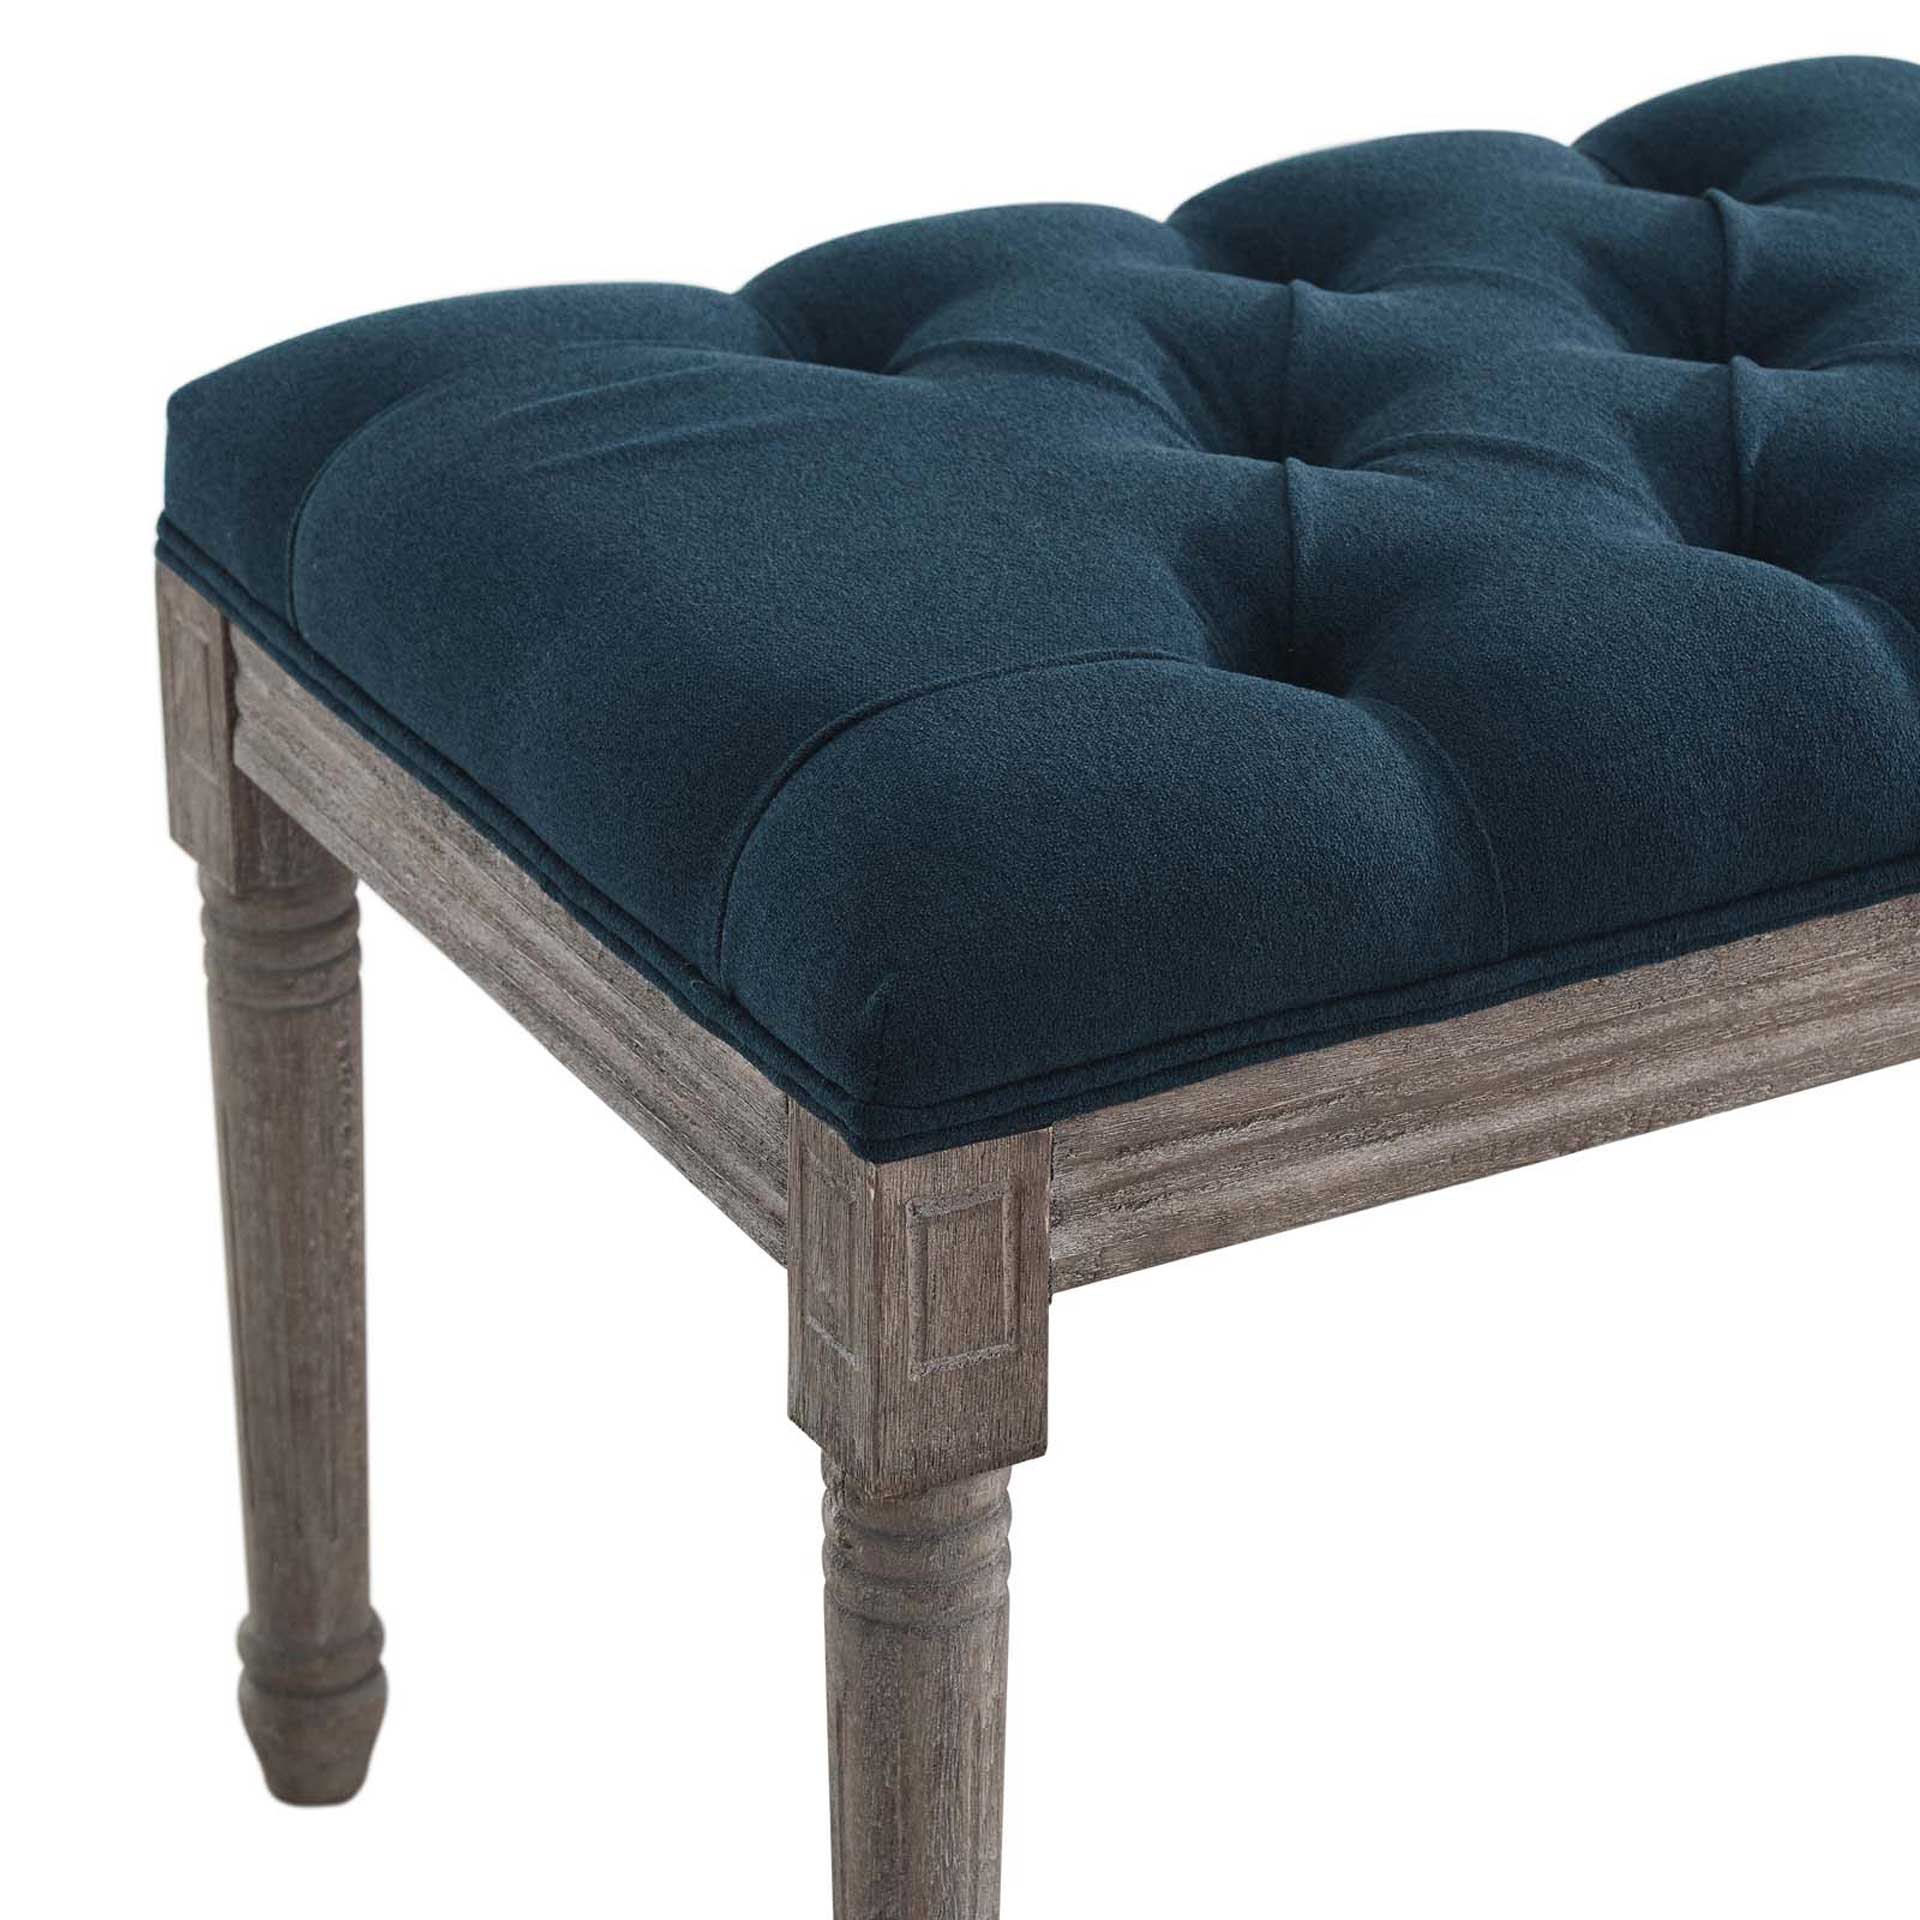 Park Upholstered Fabric Bench Navy